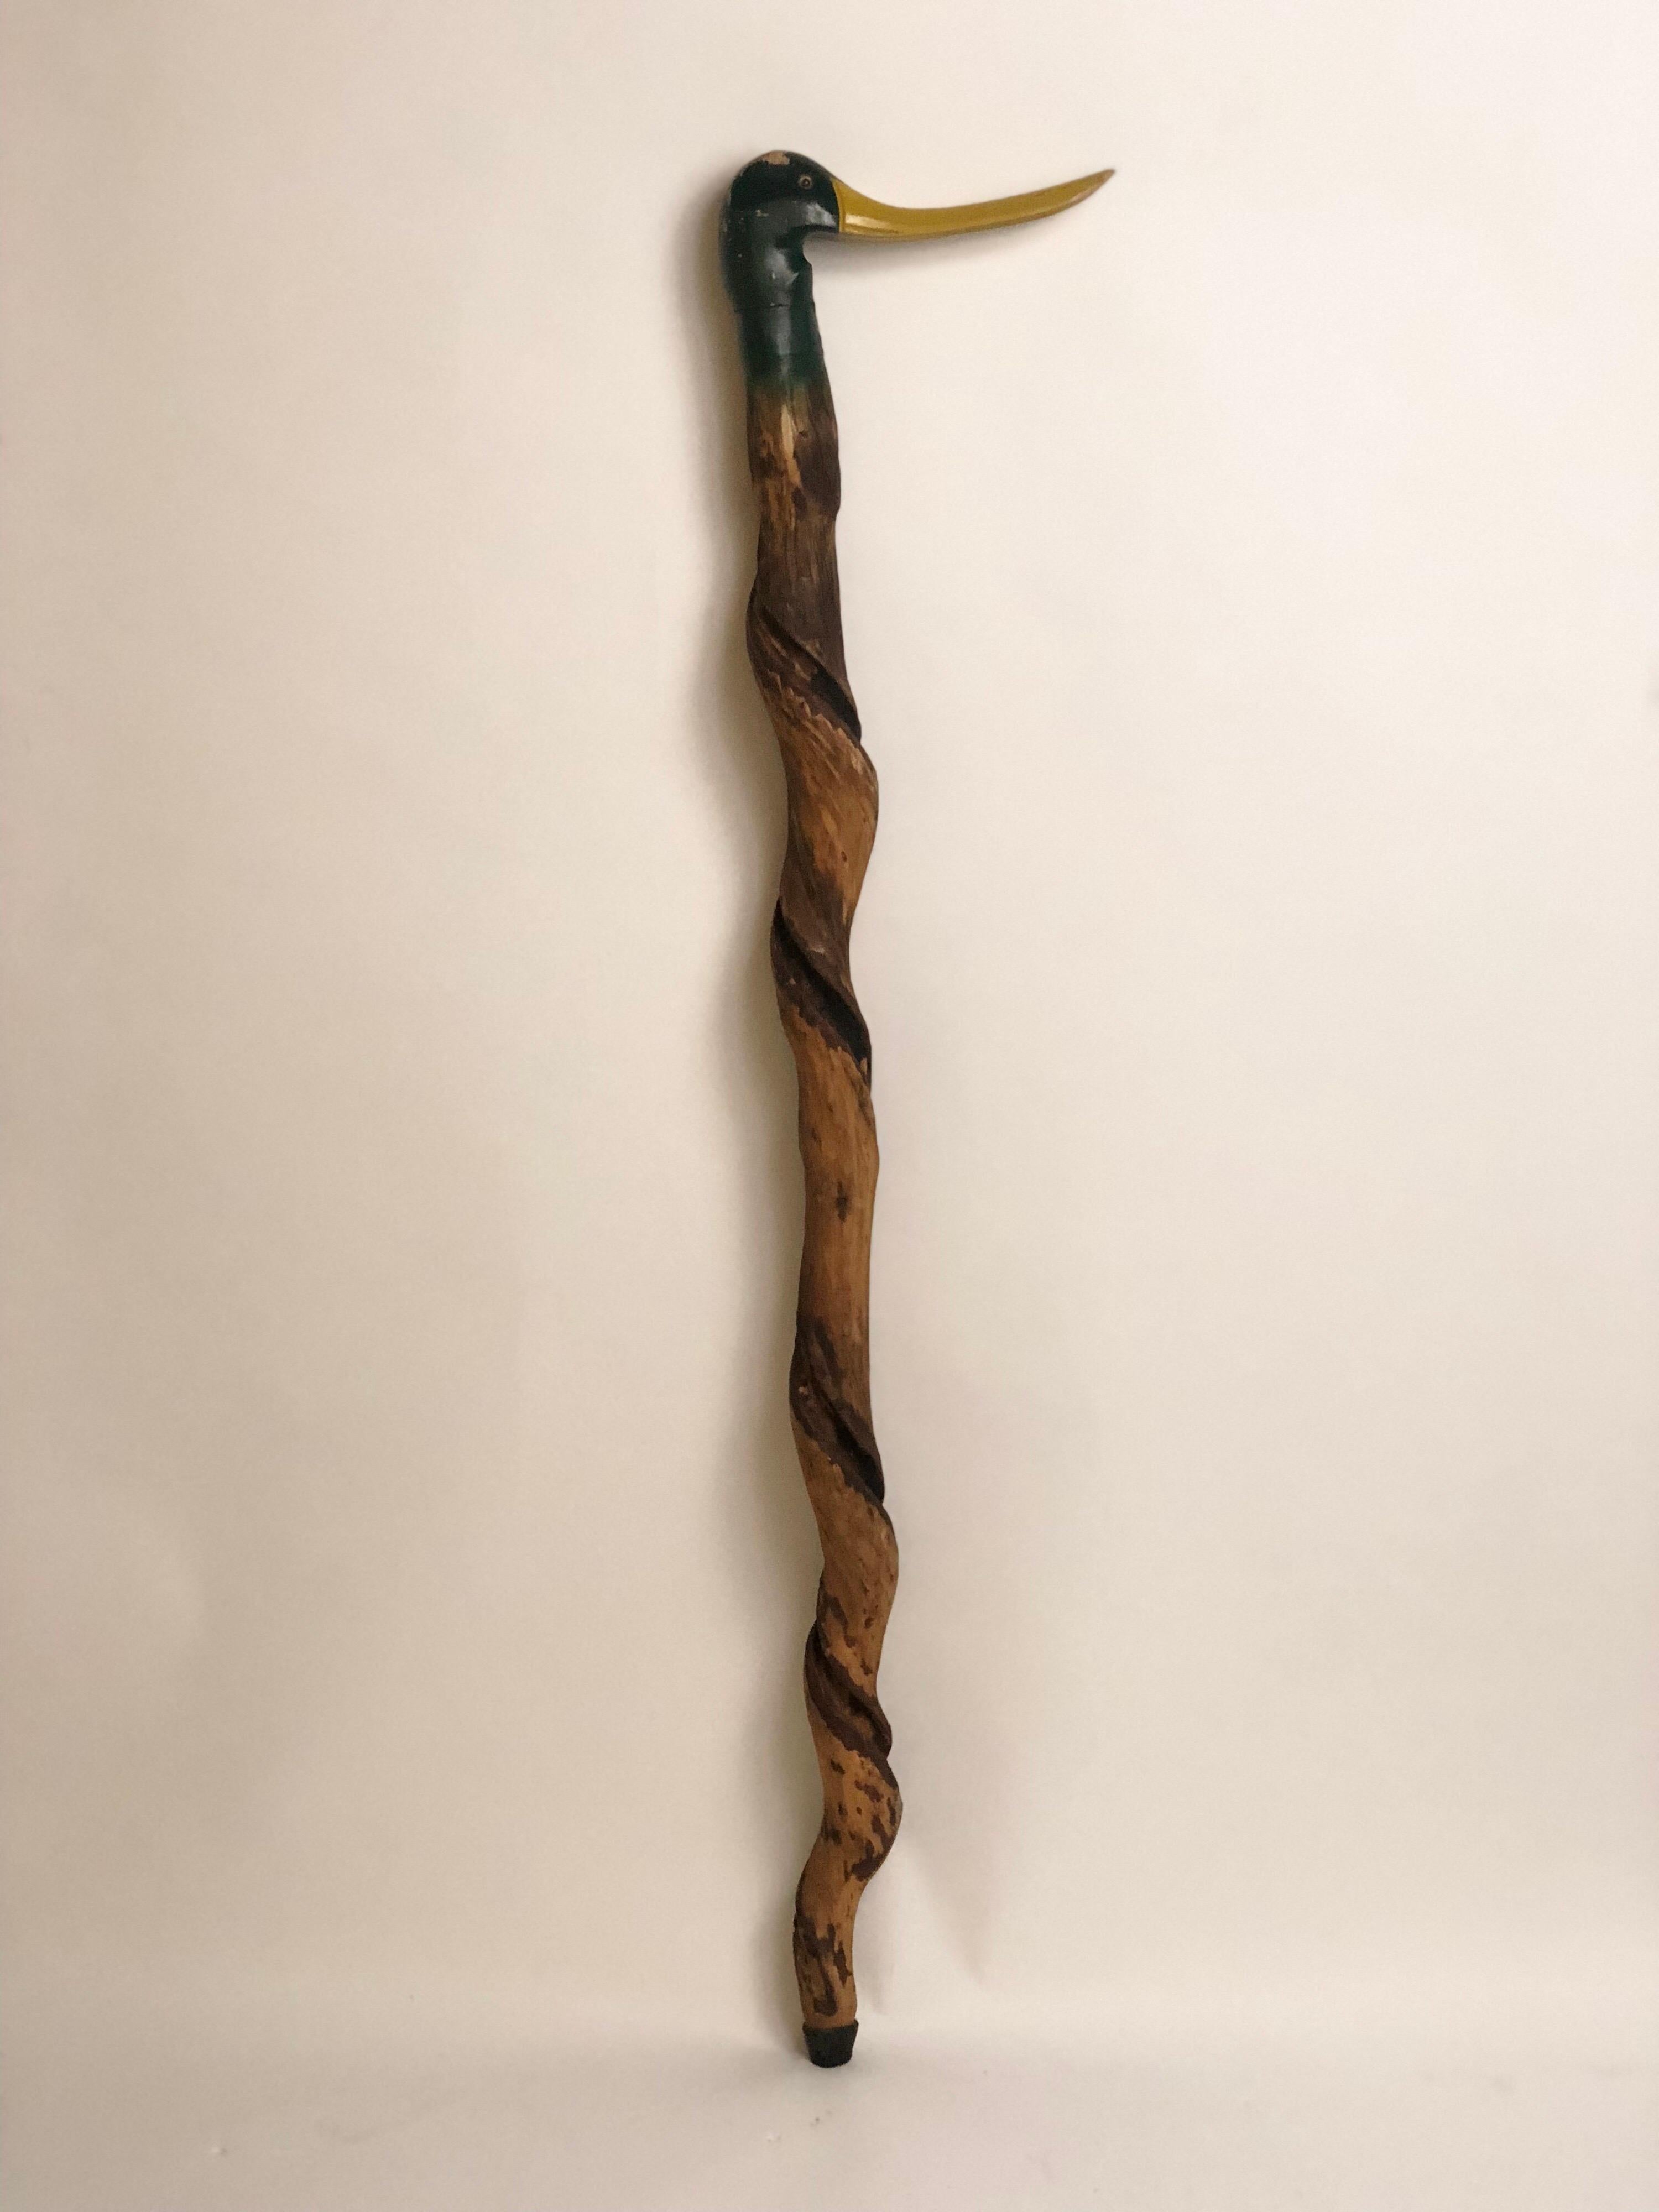 20th century American vintage walking cane perhaps carved from a tree root with a finely detailed and painted mallard head at the knob and a natural wooden shaft.